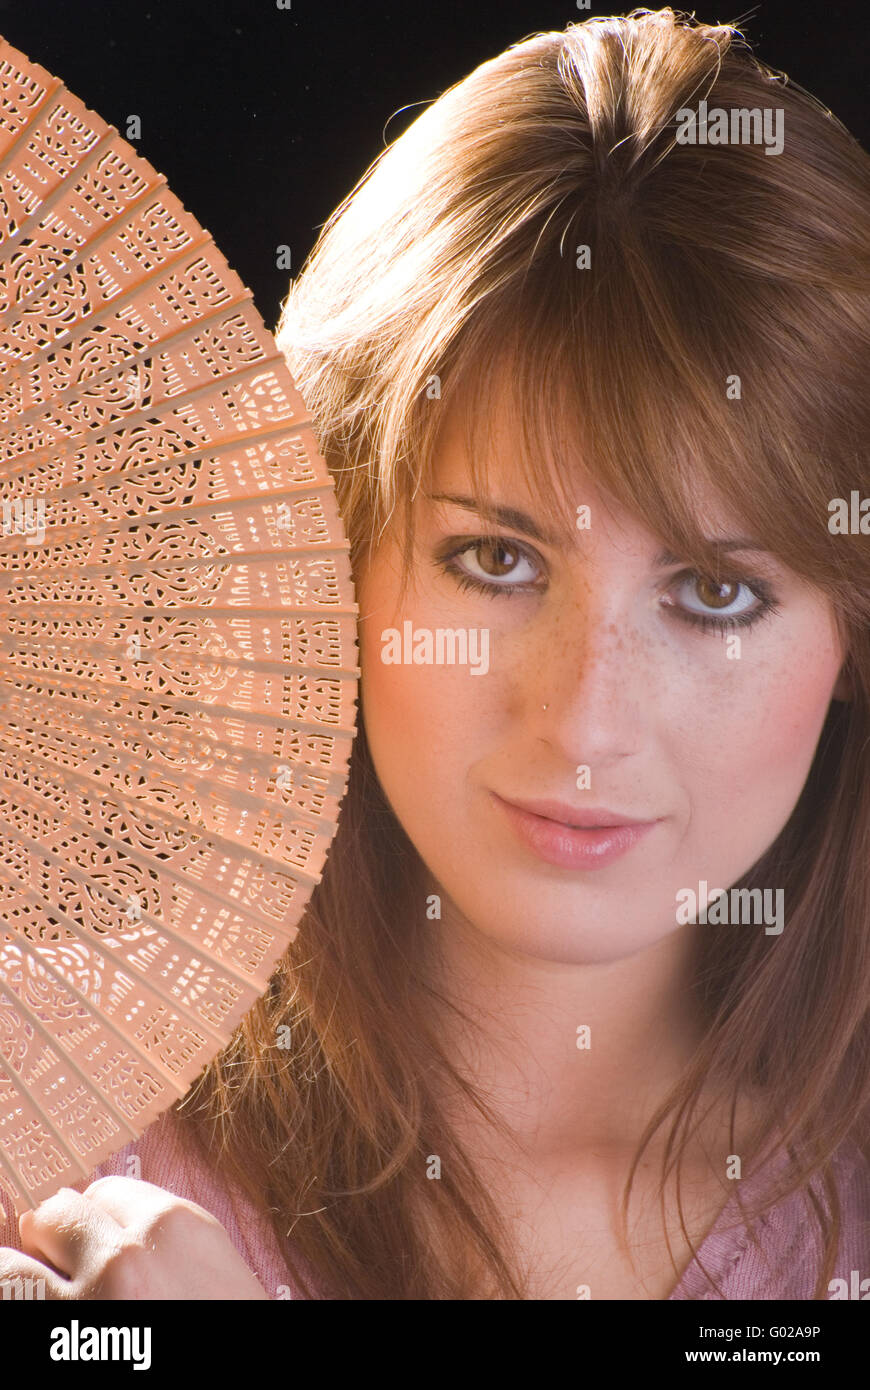 Woman with a Fan Stock Photo